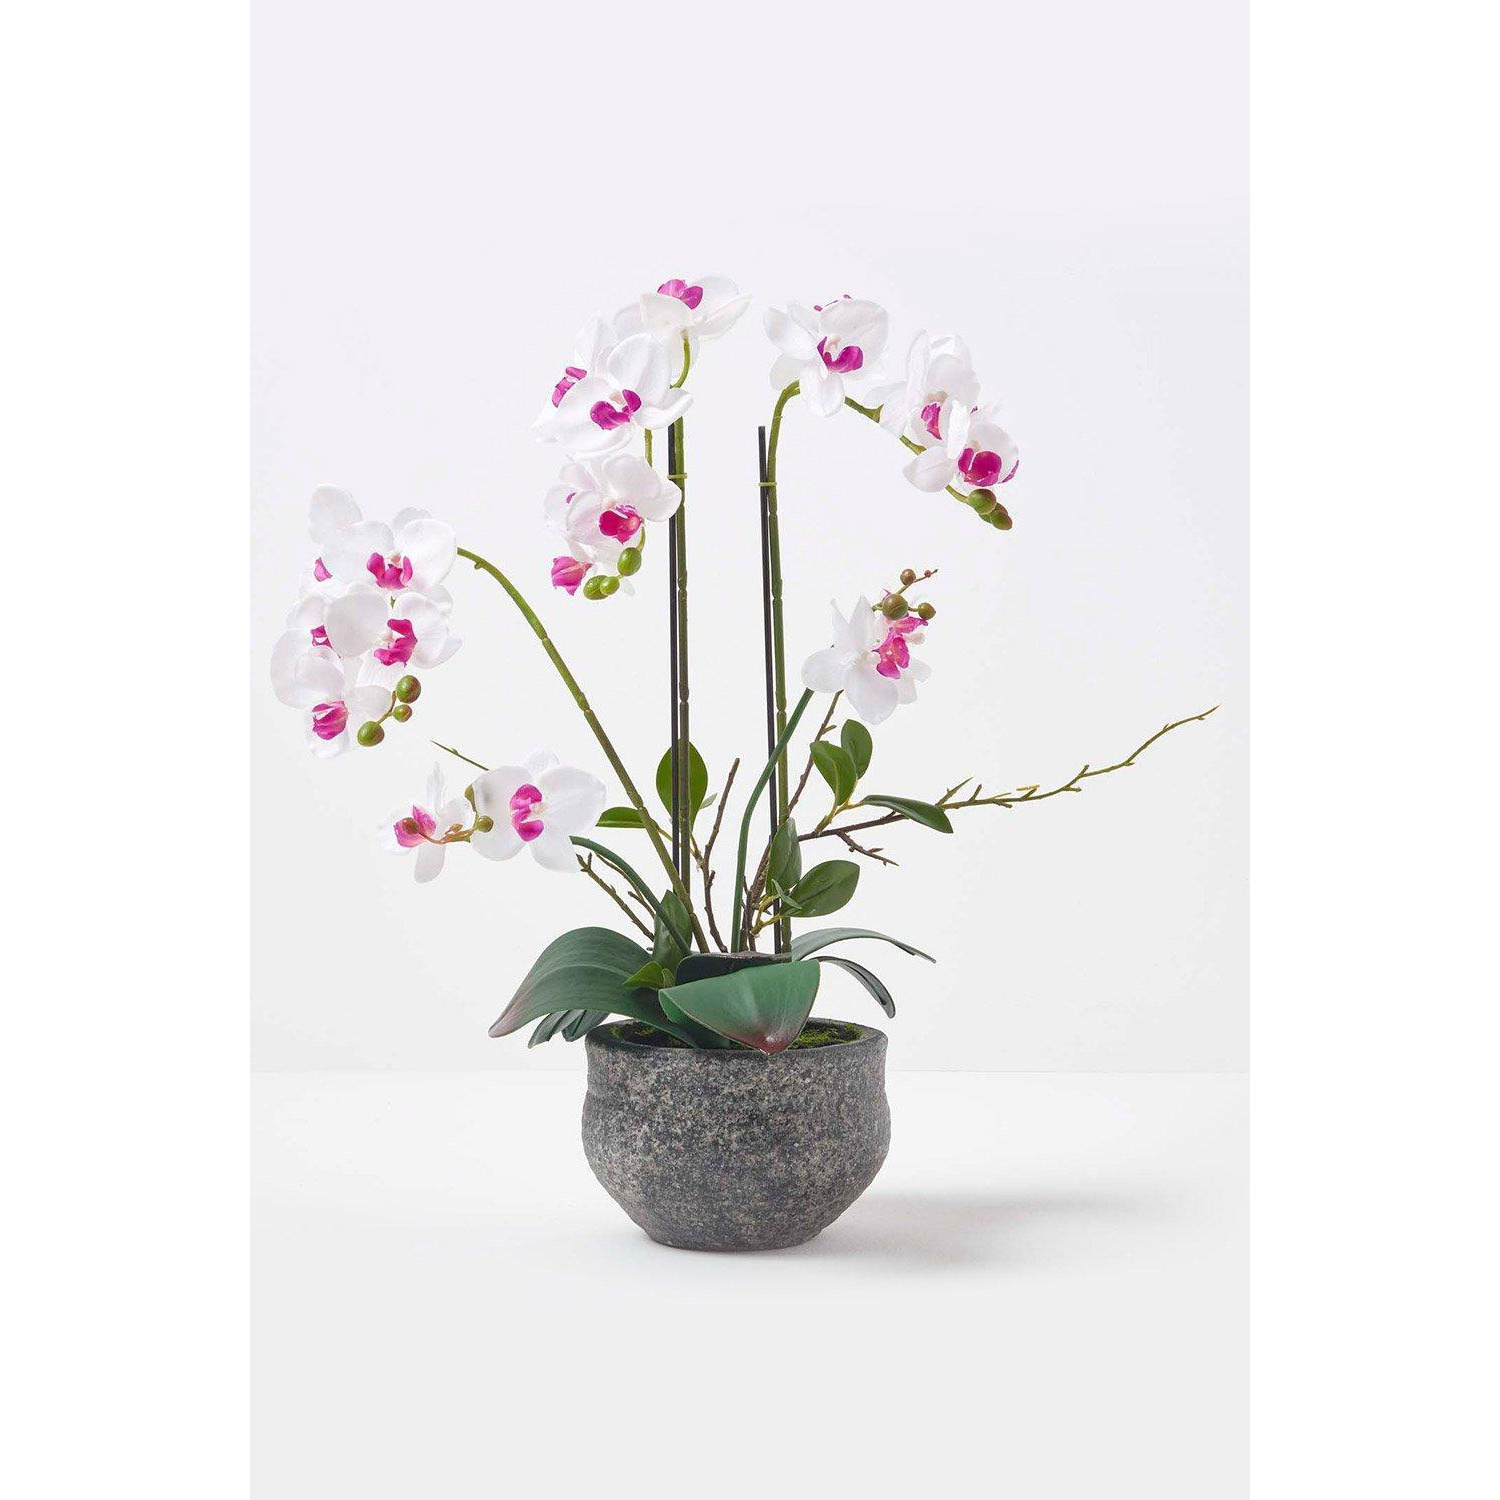 White Orchid 52 cm Phalaenopsis in Cement Pot Extra Large, 5 Stems - image 1